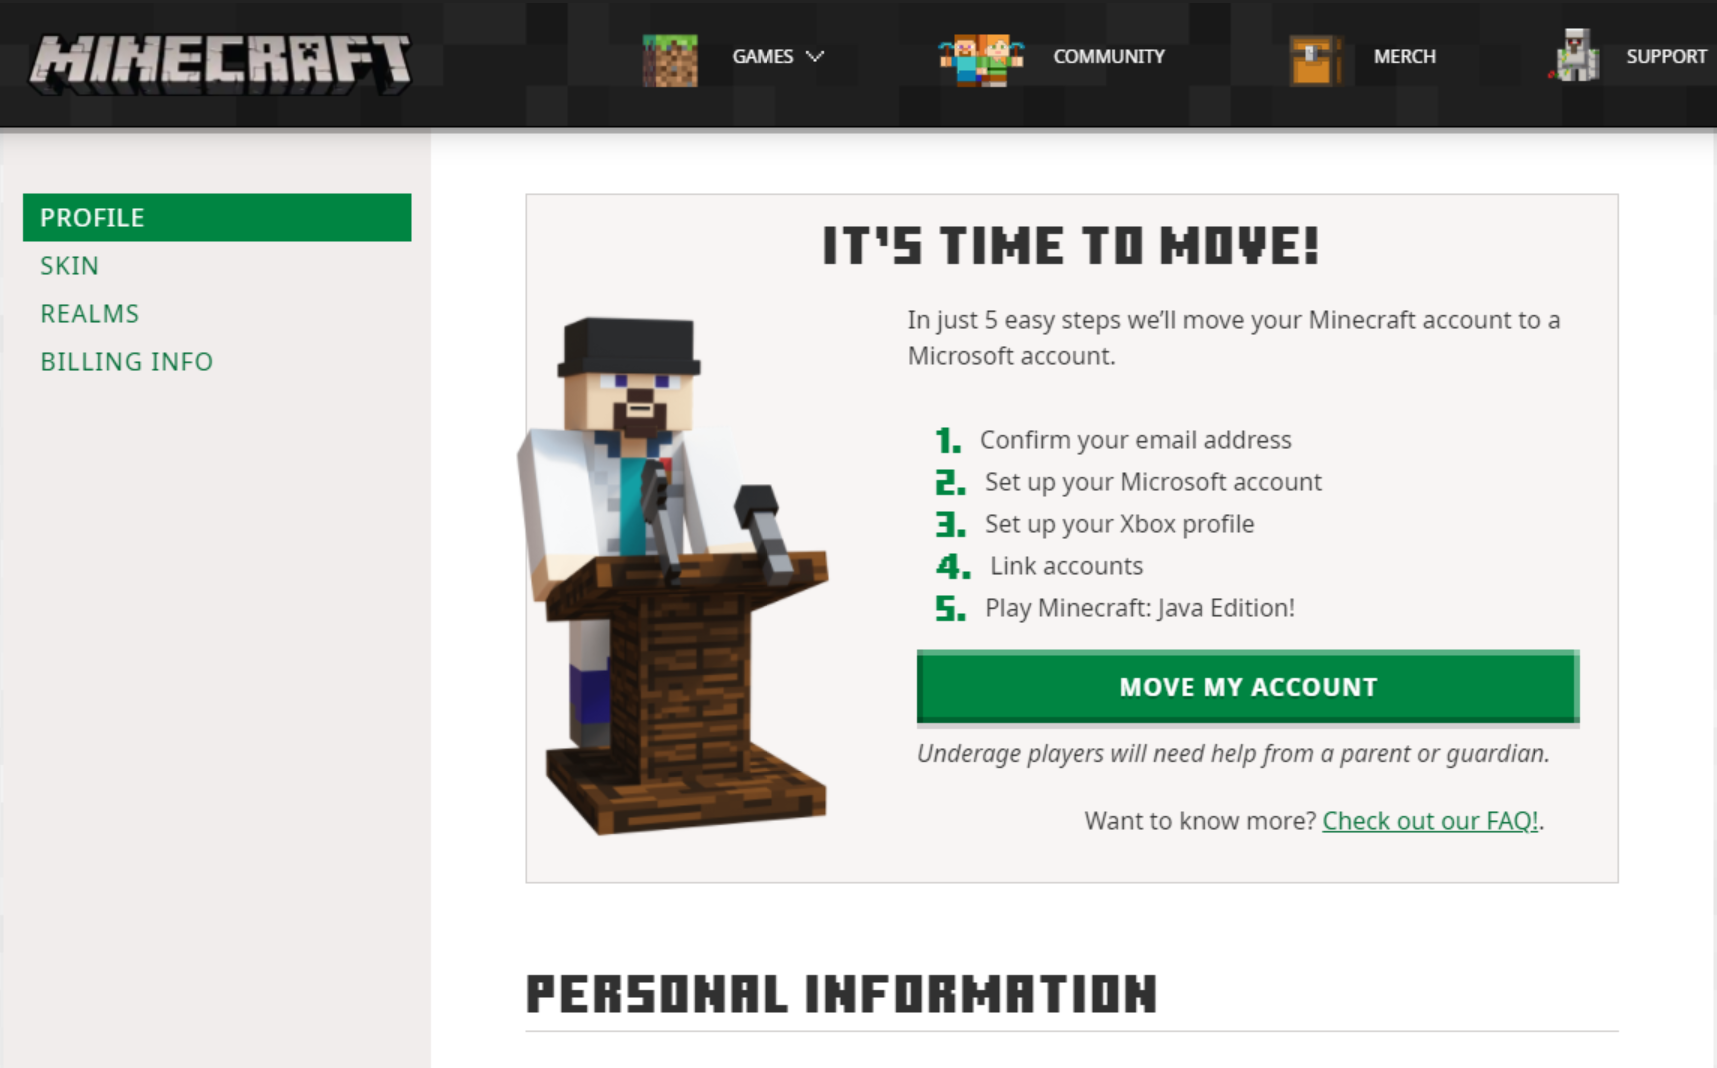 What do I get when I change my Minecraft account to a Microsoft account